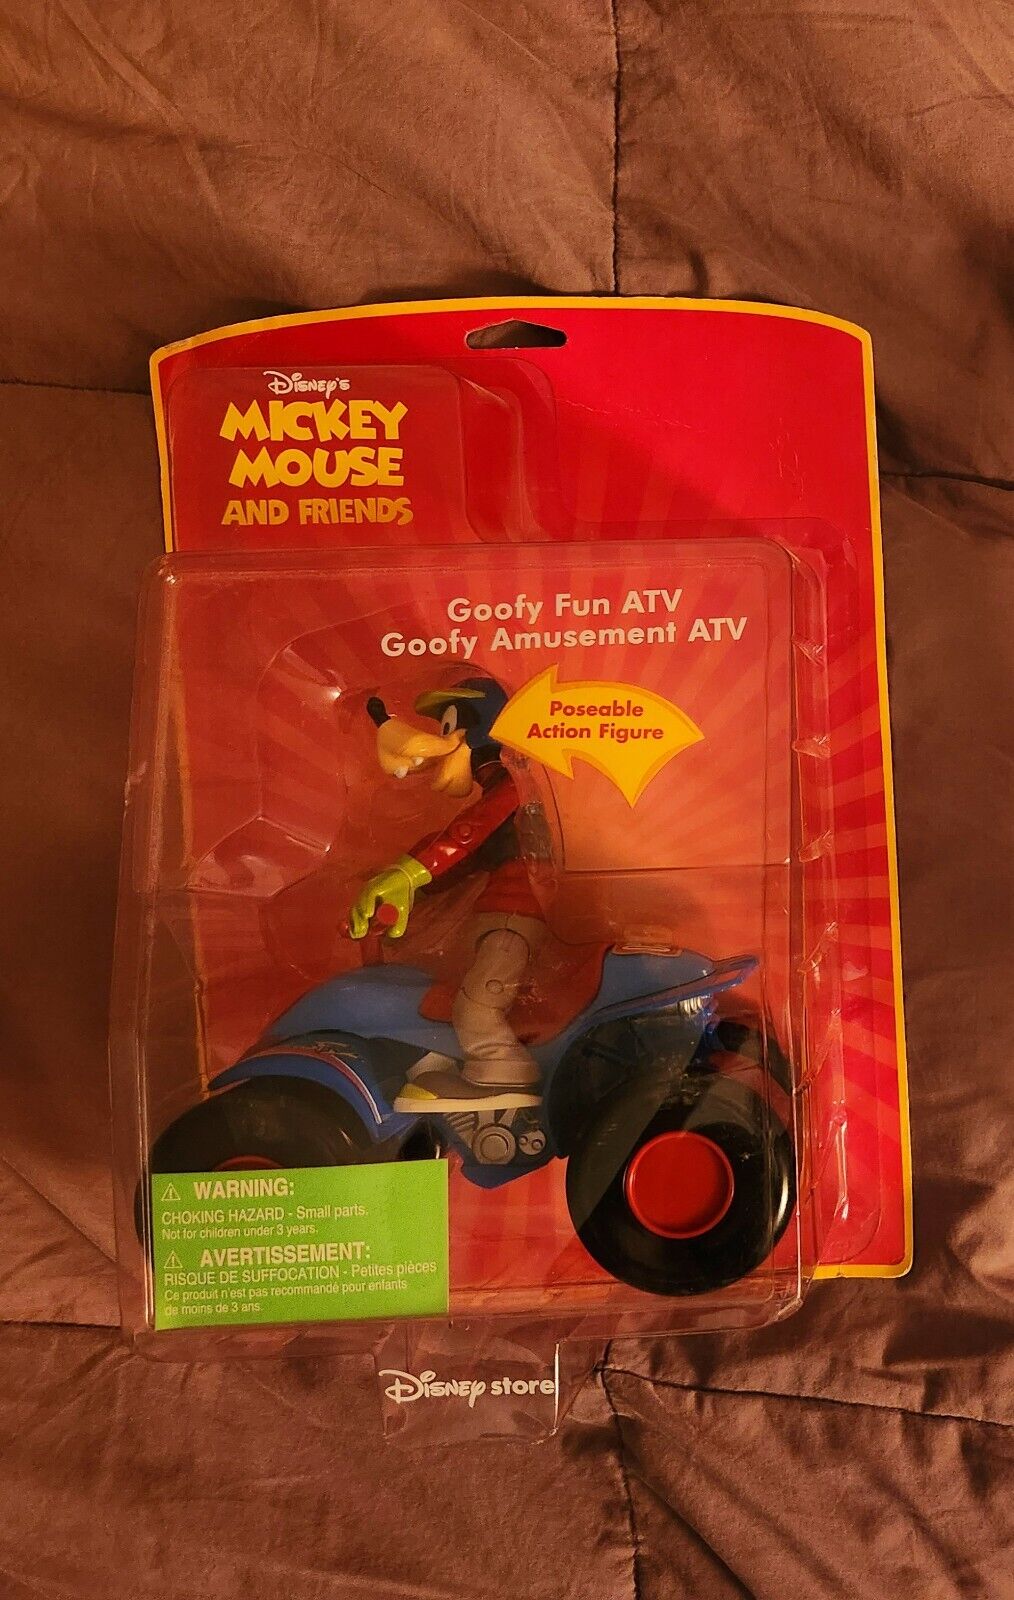 DISNEY STORE MICKEY MOUSE & FRIENDS GOOFY FUN ATV ACTION FIGURE NEW IN PKG